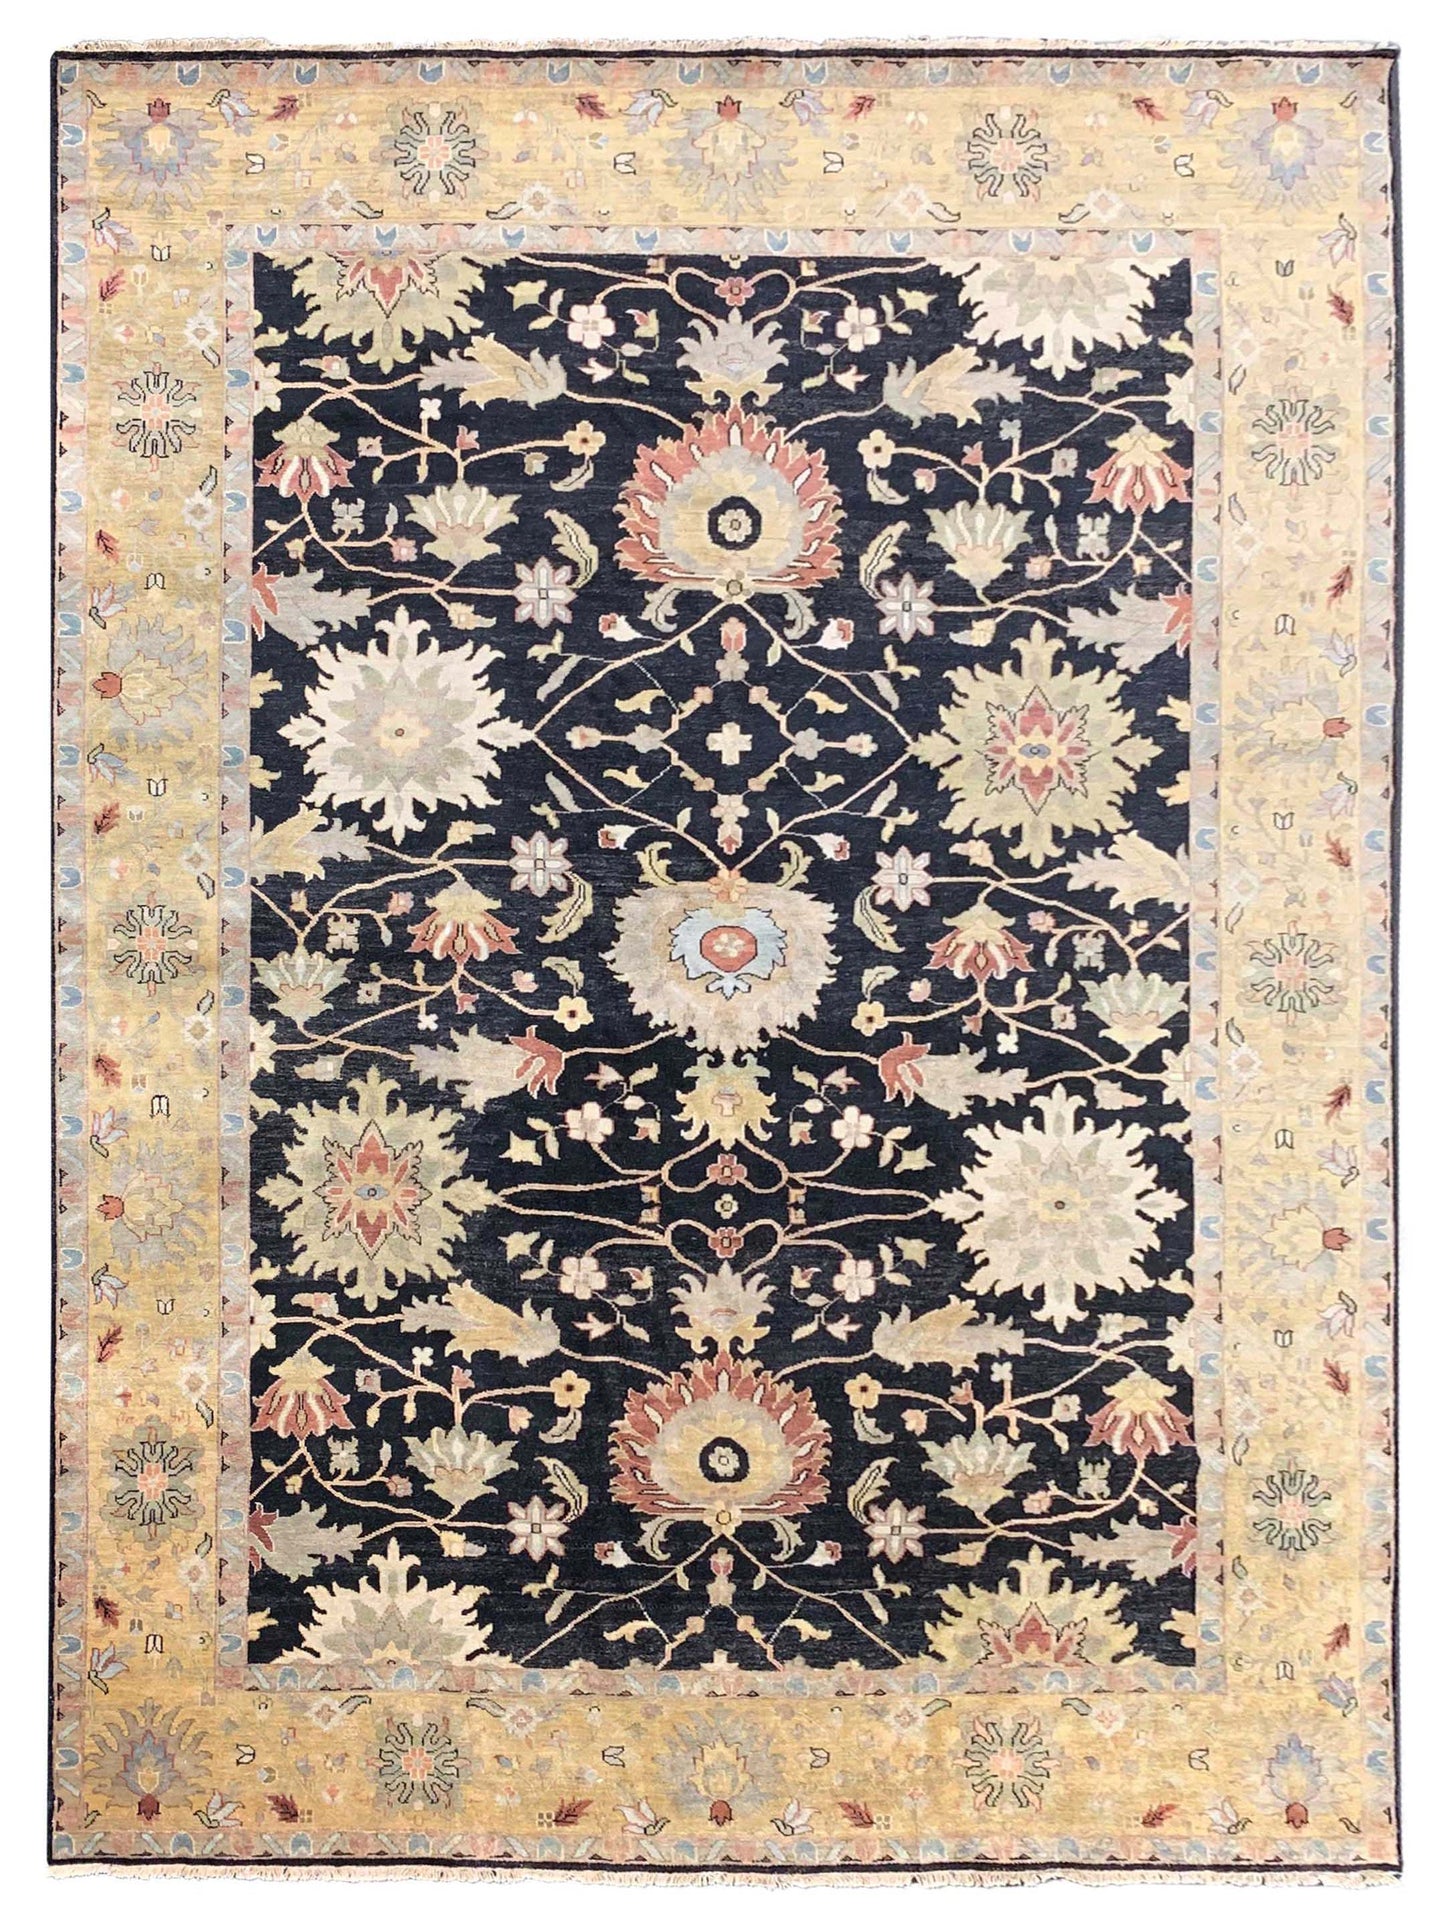 Artisan Cameron CB-205 Black Traditional Knotted Rug